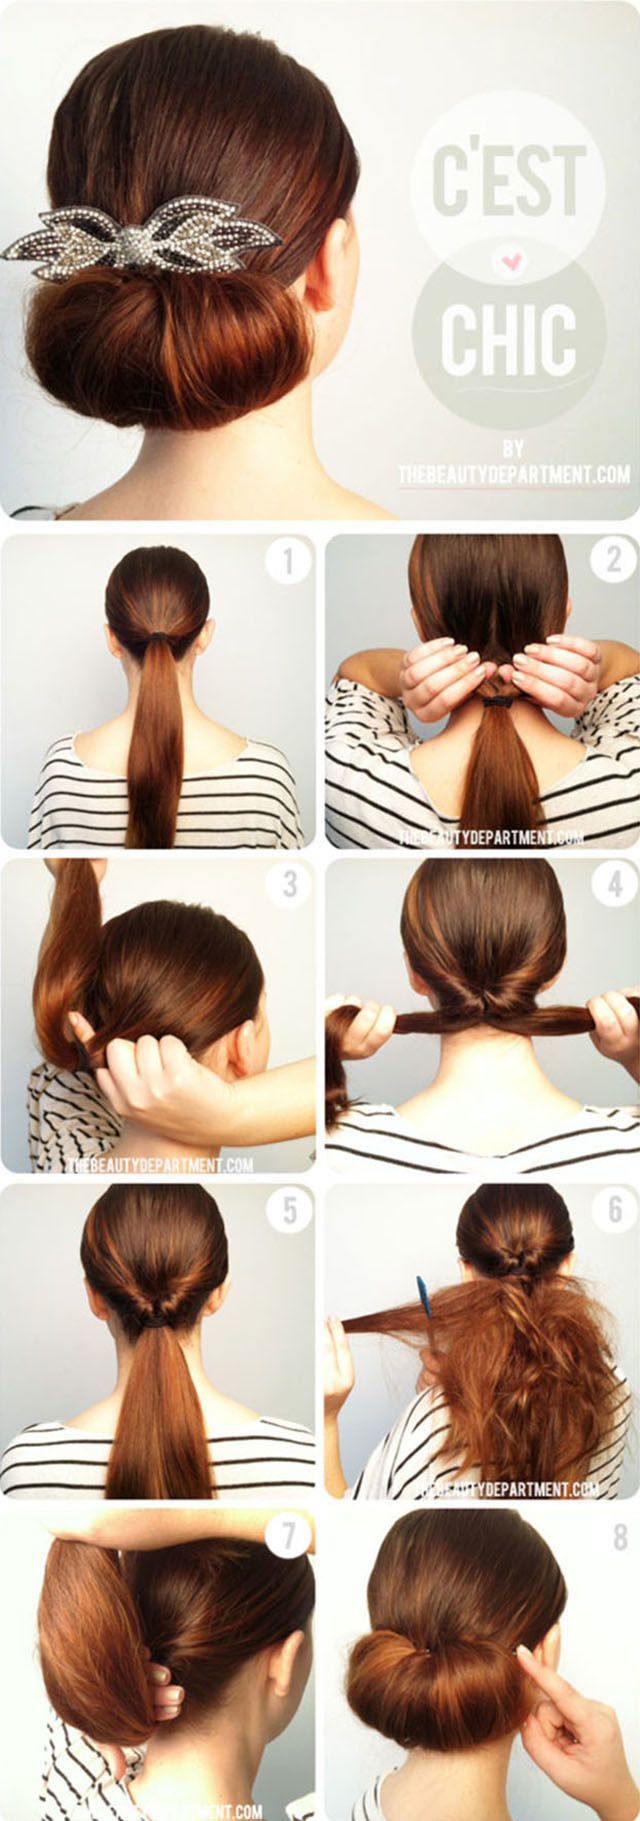 1470026825 easy and fast diy hairstyle tutorials 3